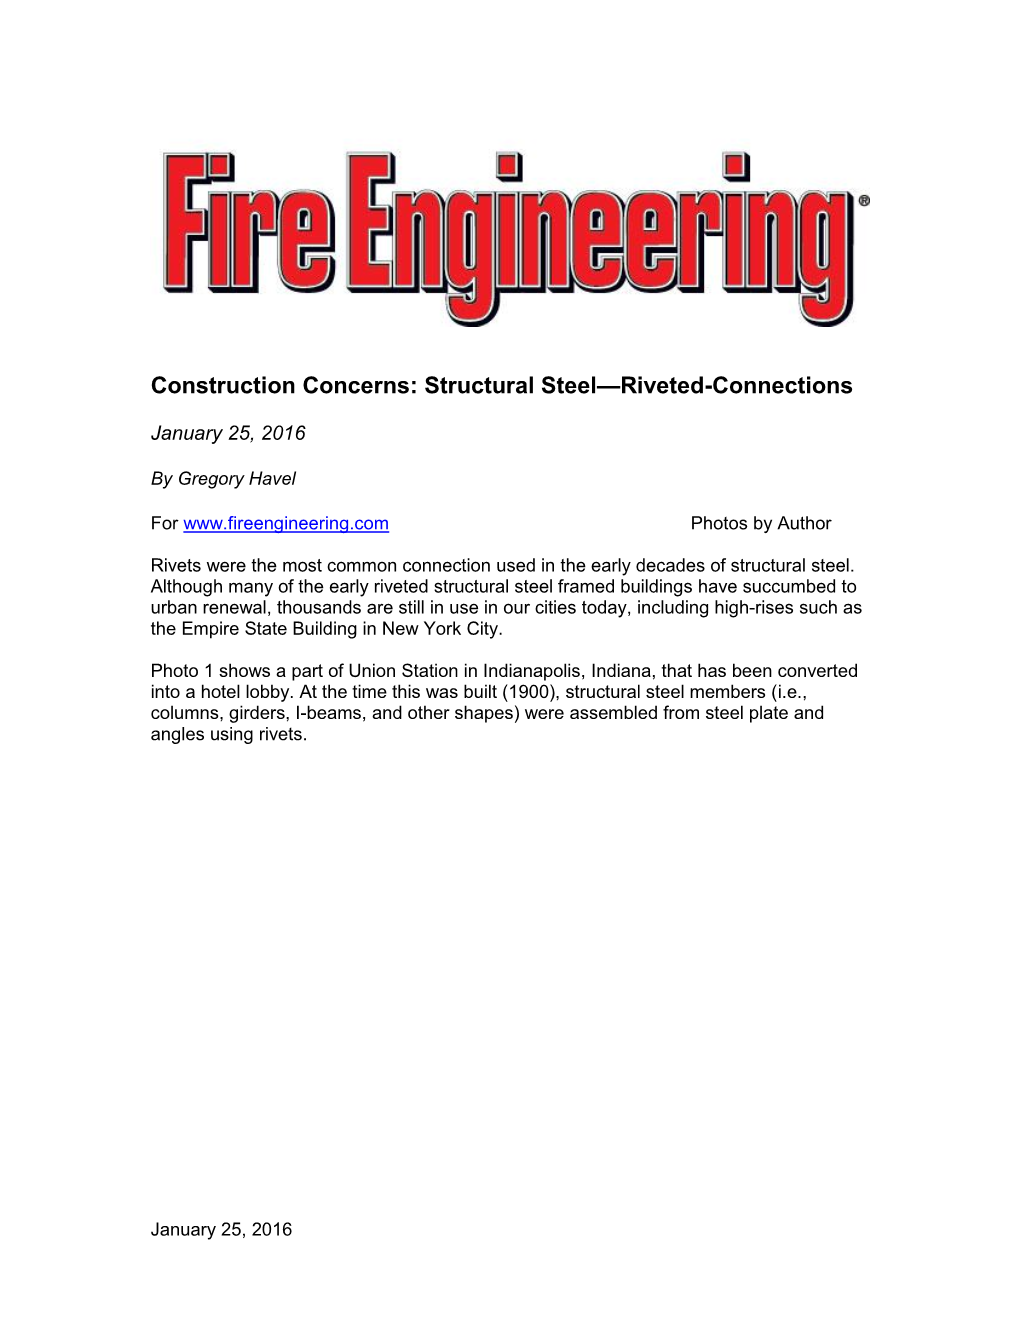 Construction Concerns: Structural Steel—Riveted-Connections